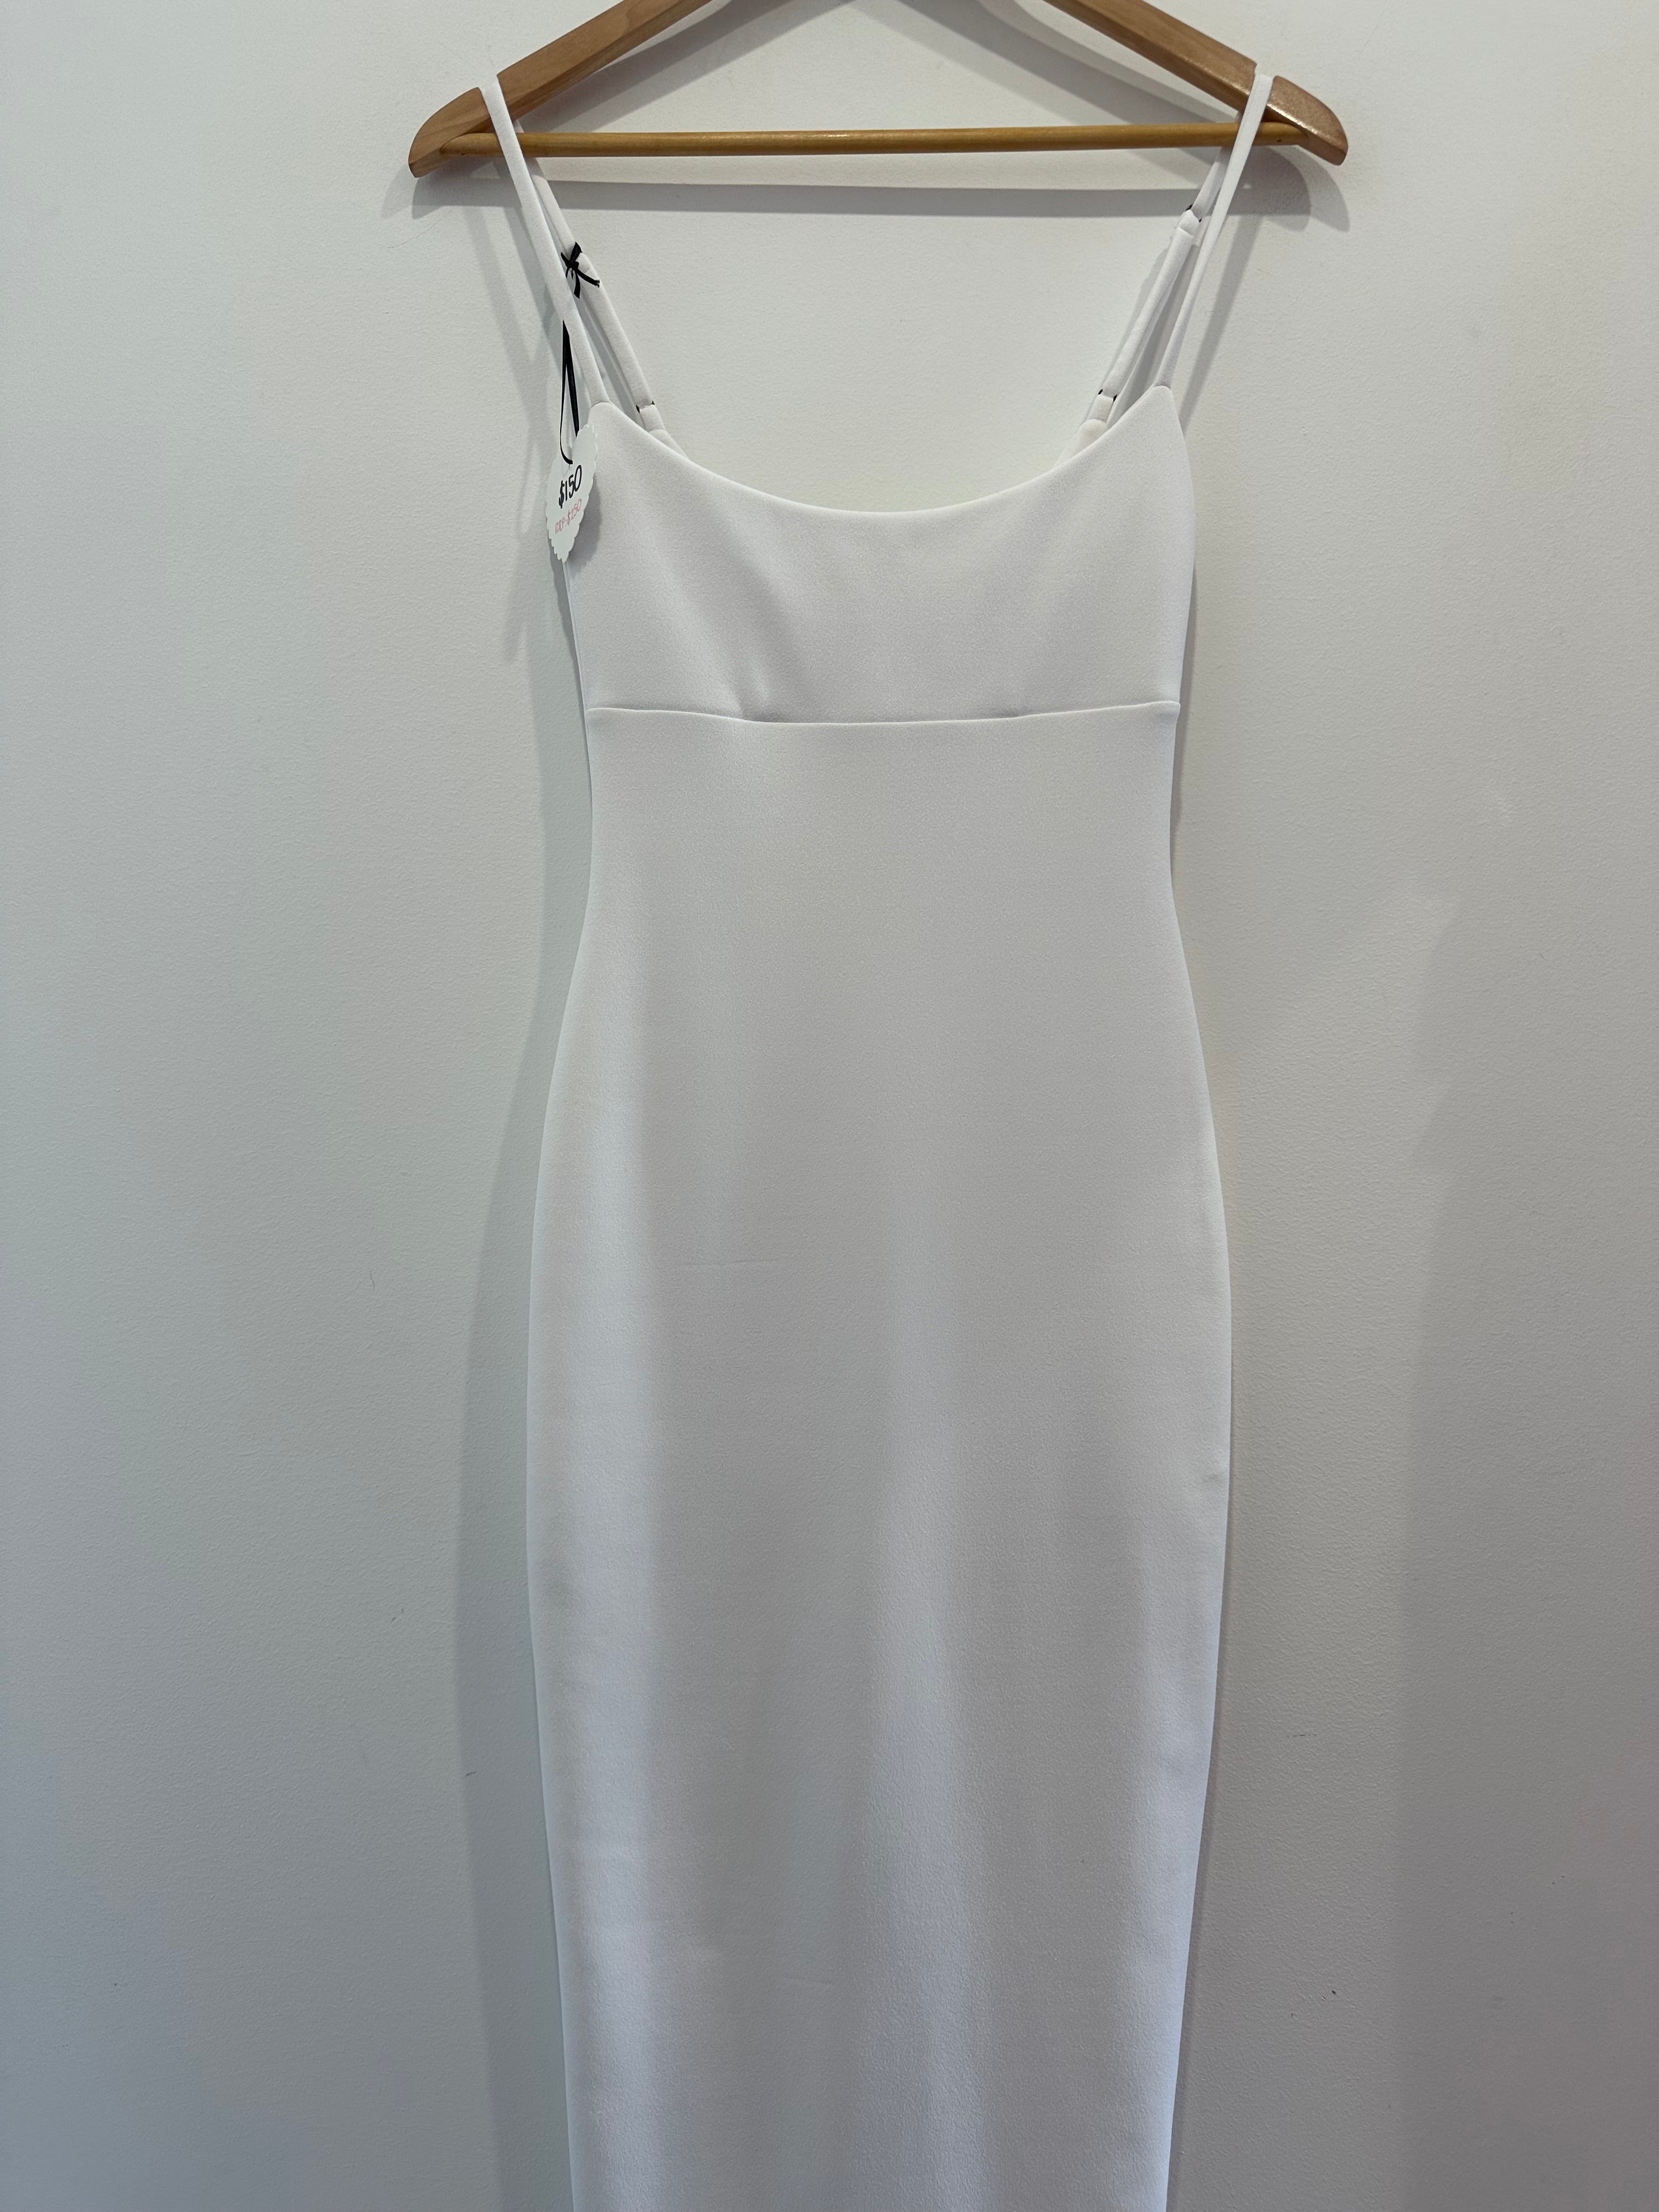 BAILEY GOWN XS IVORY - FOR SALE